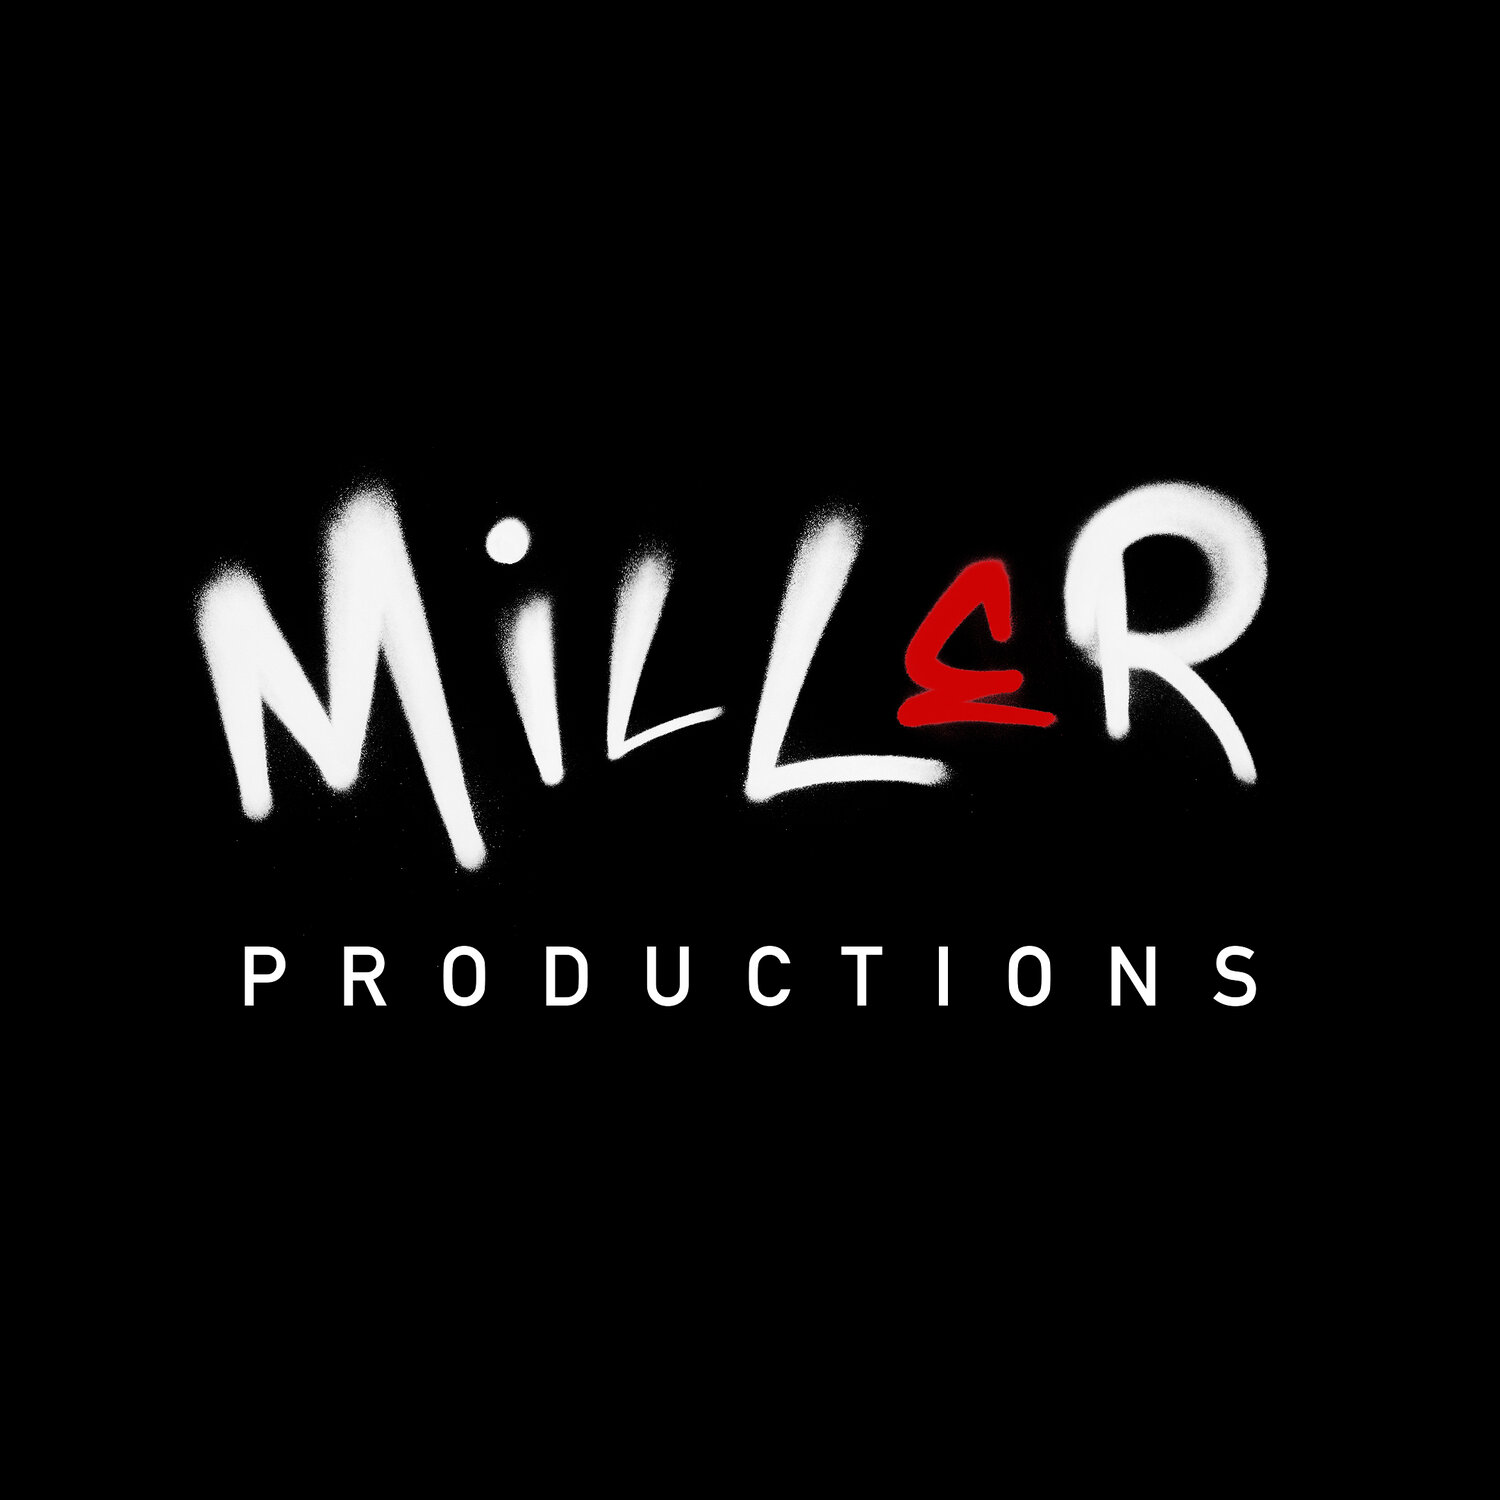 Miller Productions